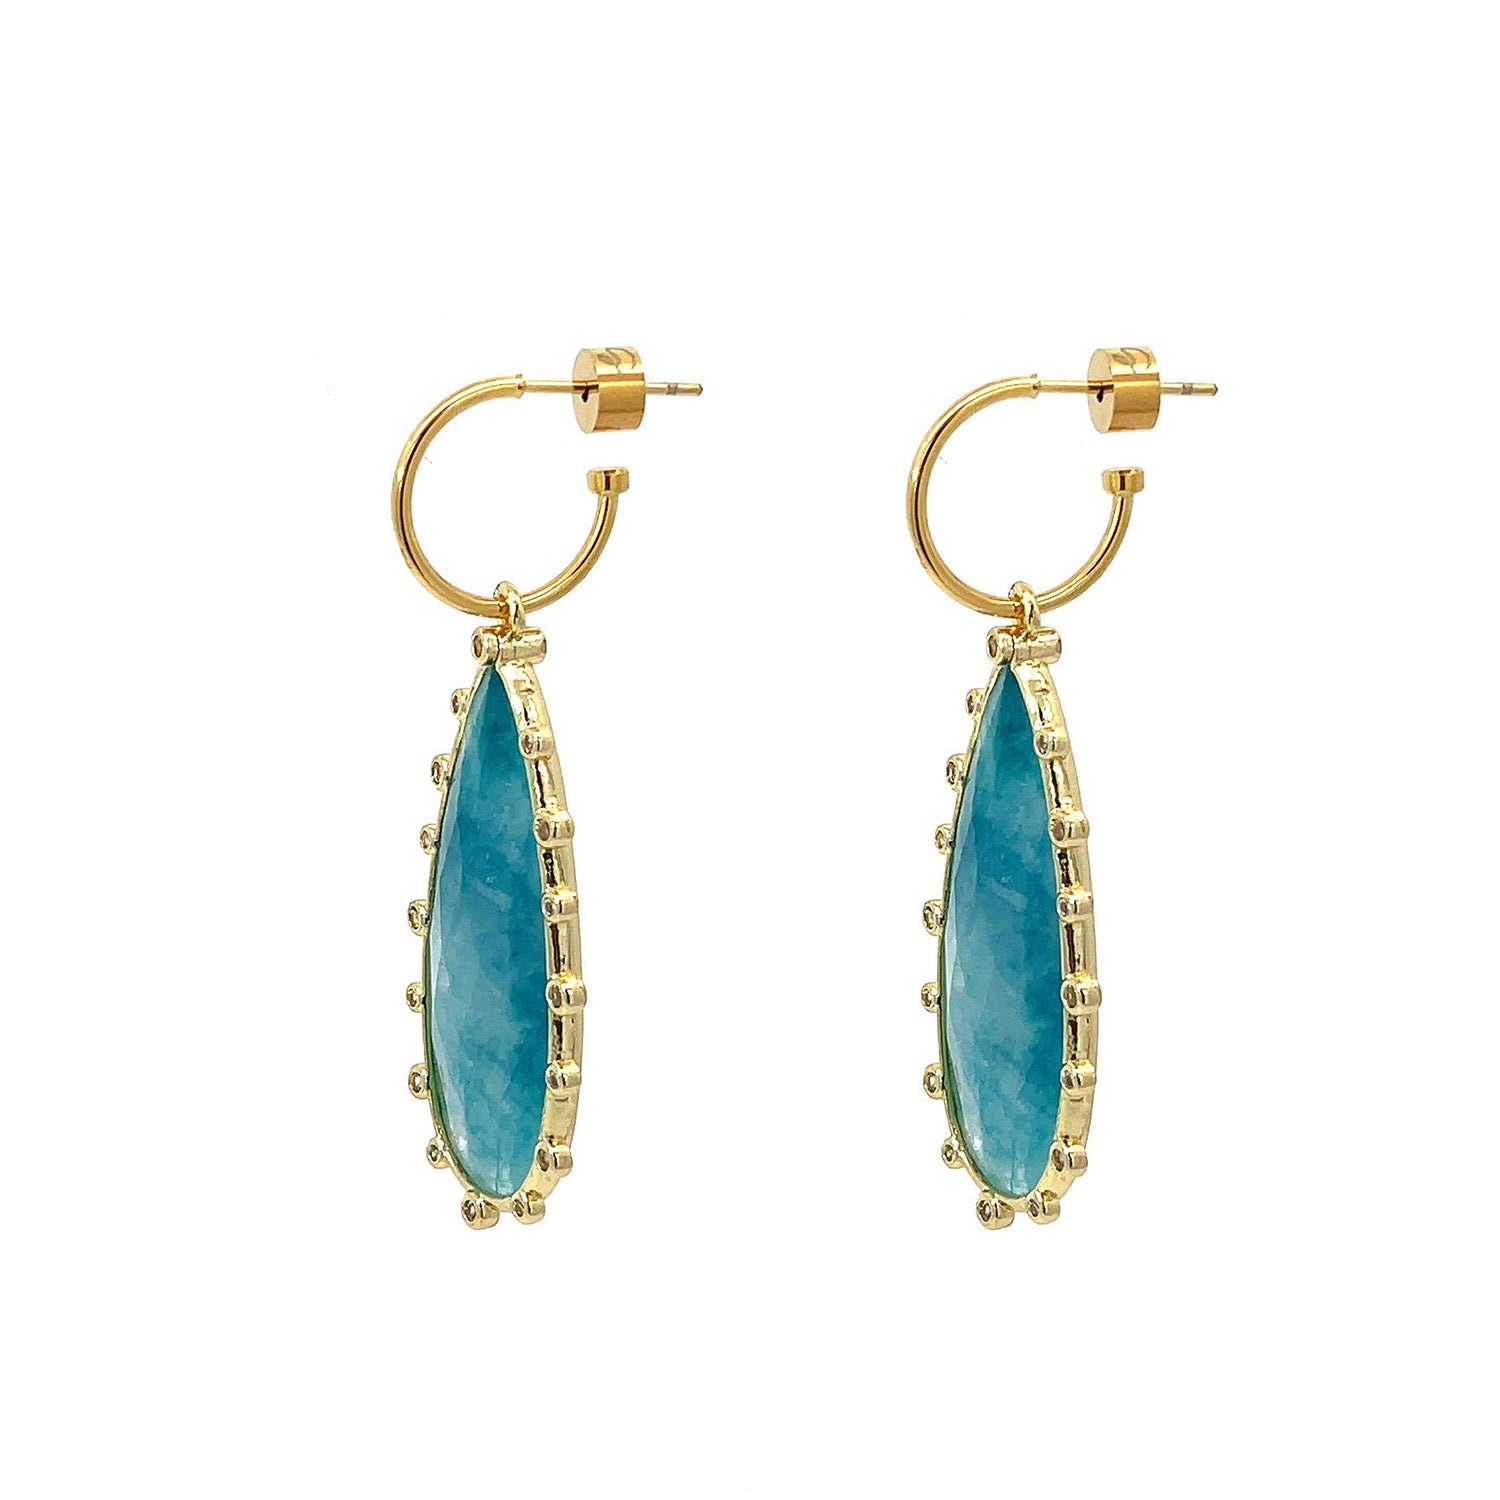 Discover Spiked Beauty Apatite Earrings